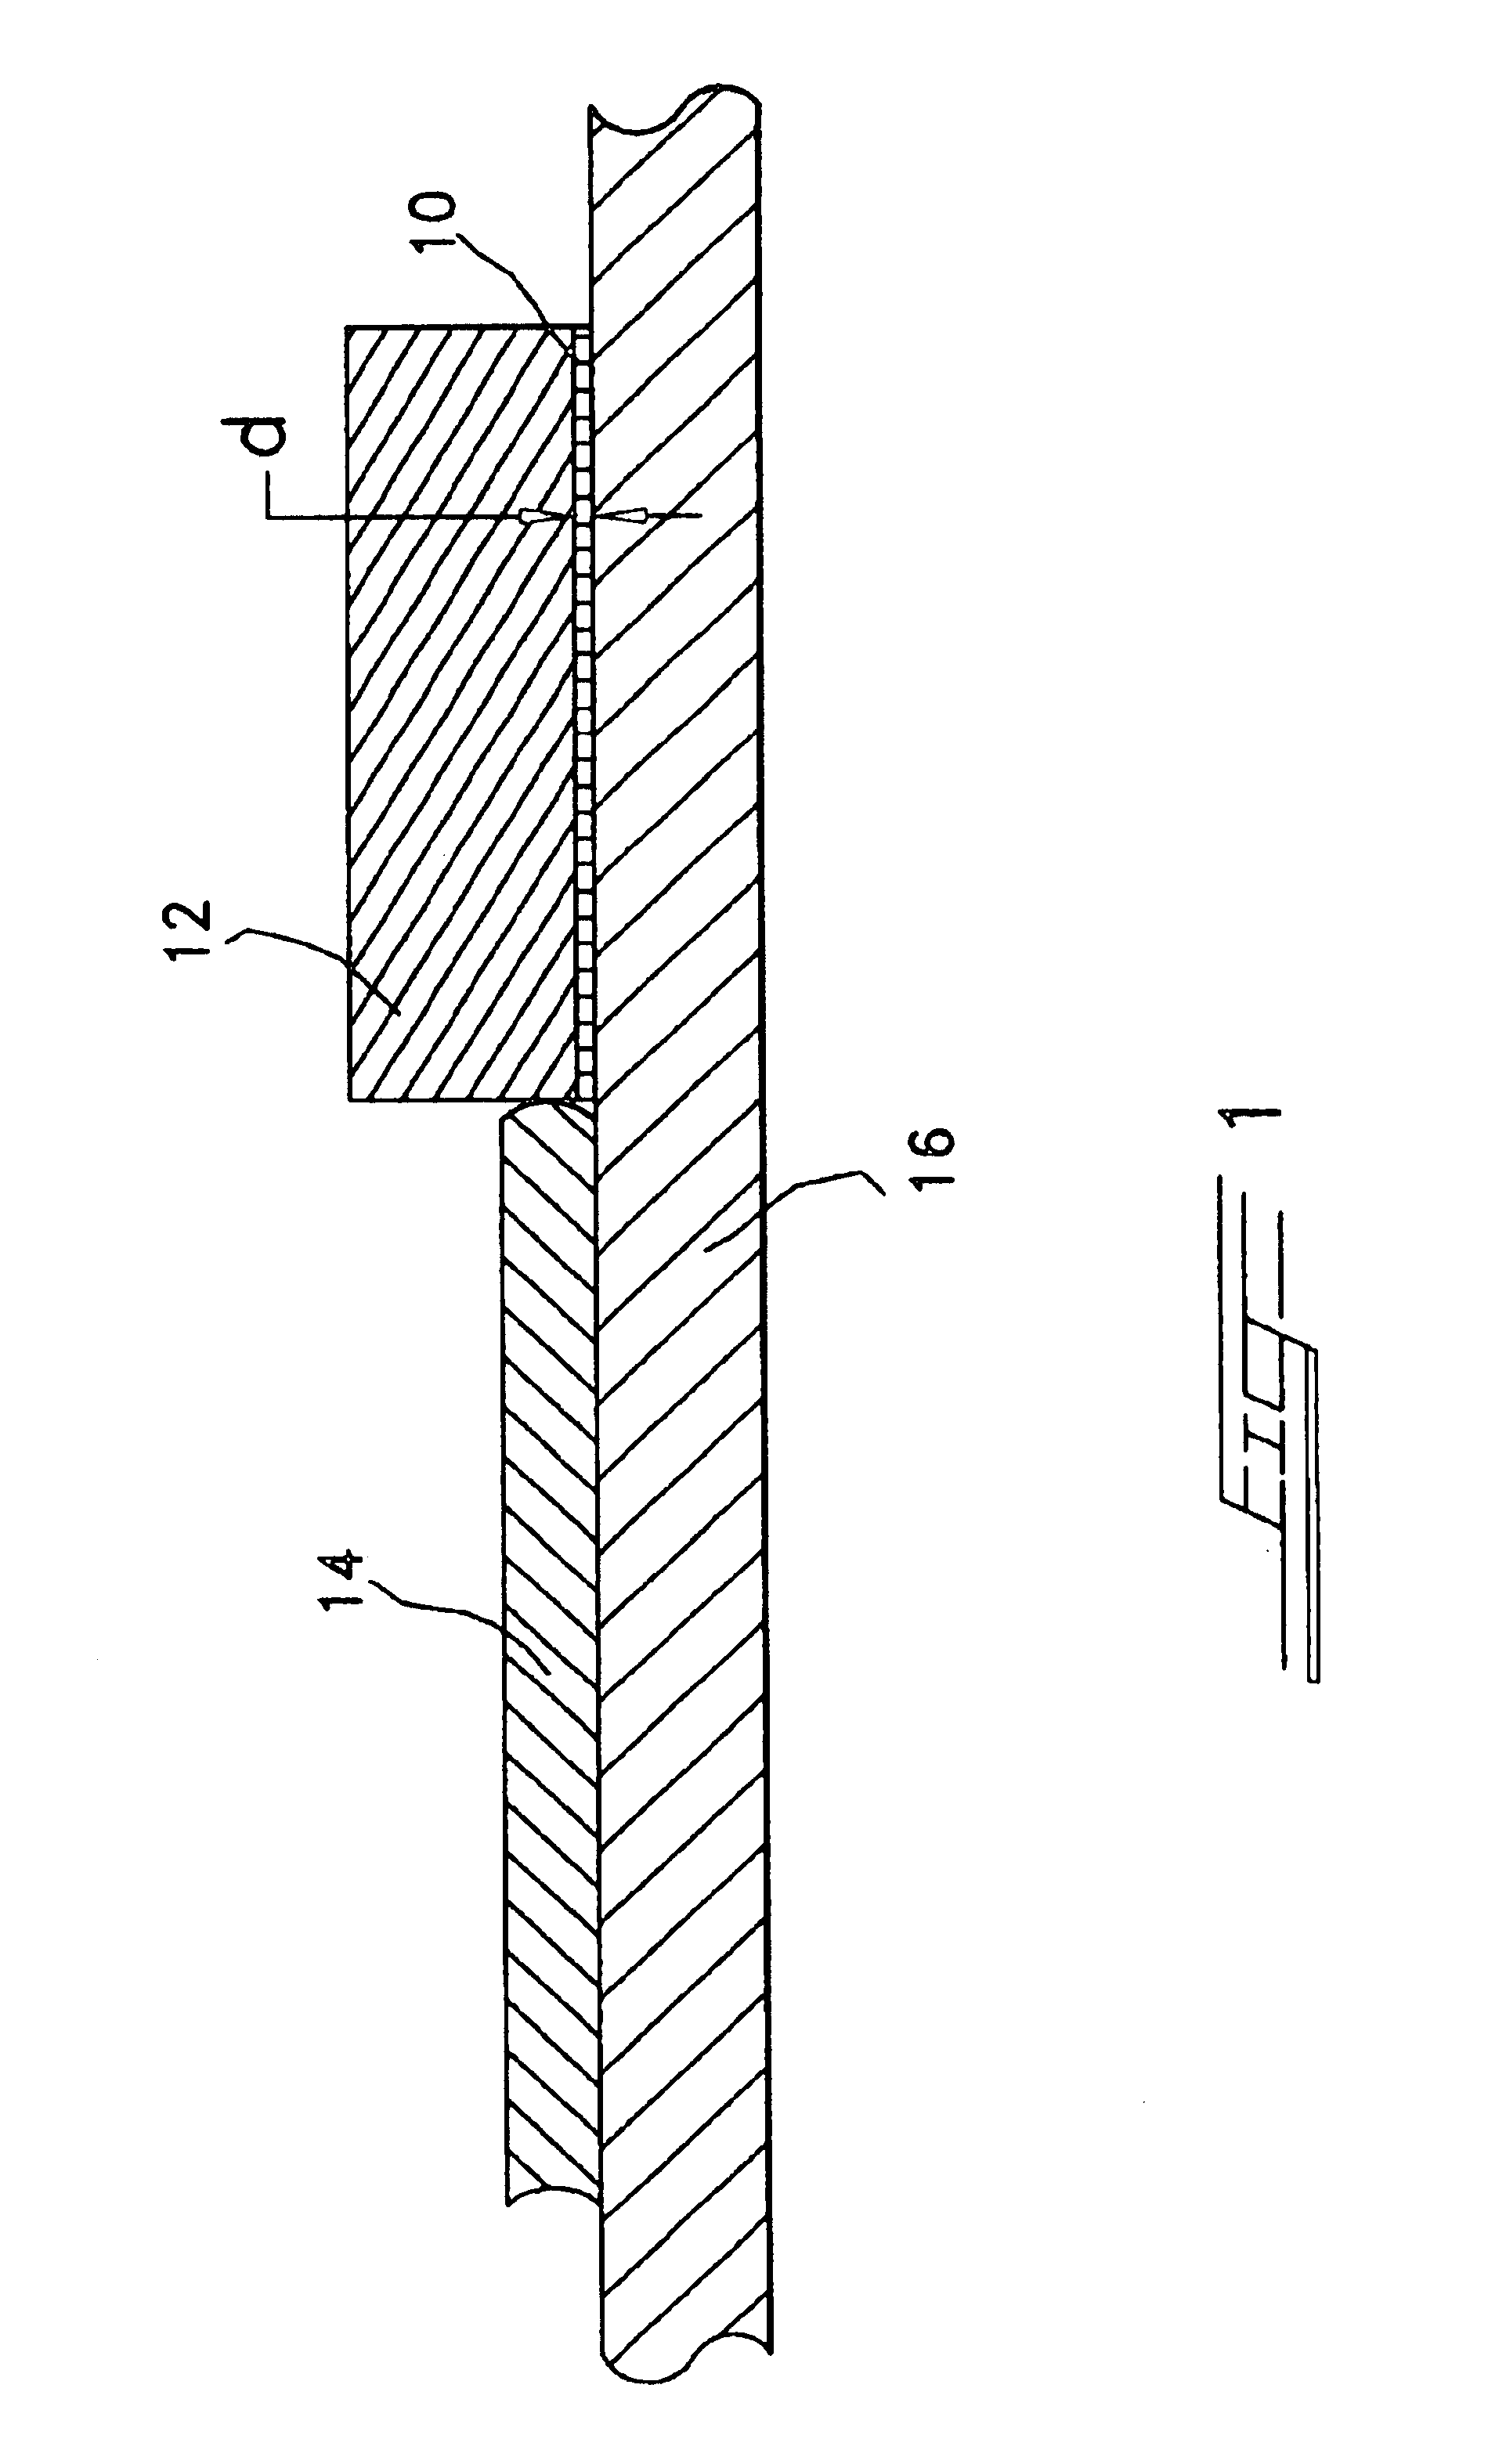 Retaining ring with wear pad for use in chemical mechanical planarization